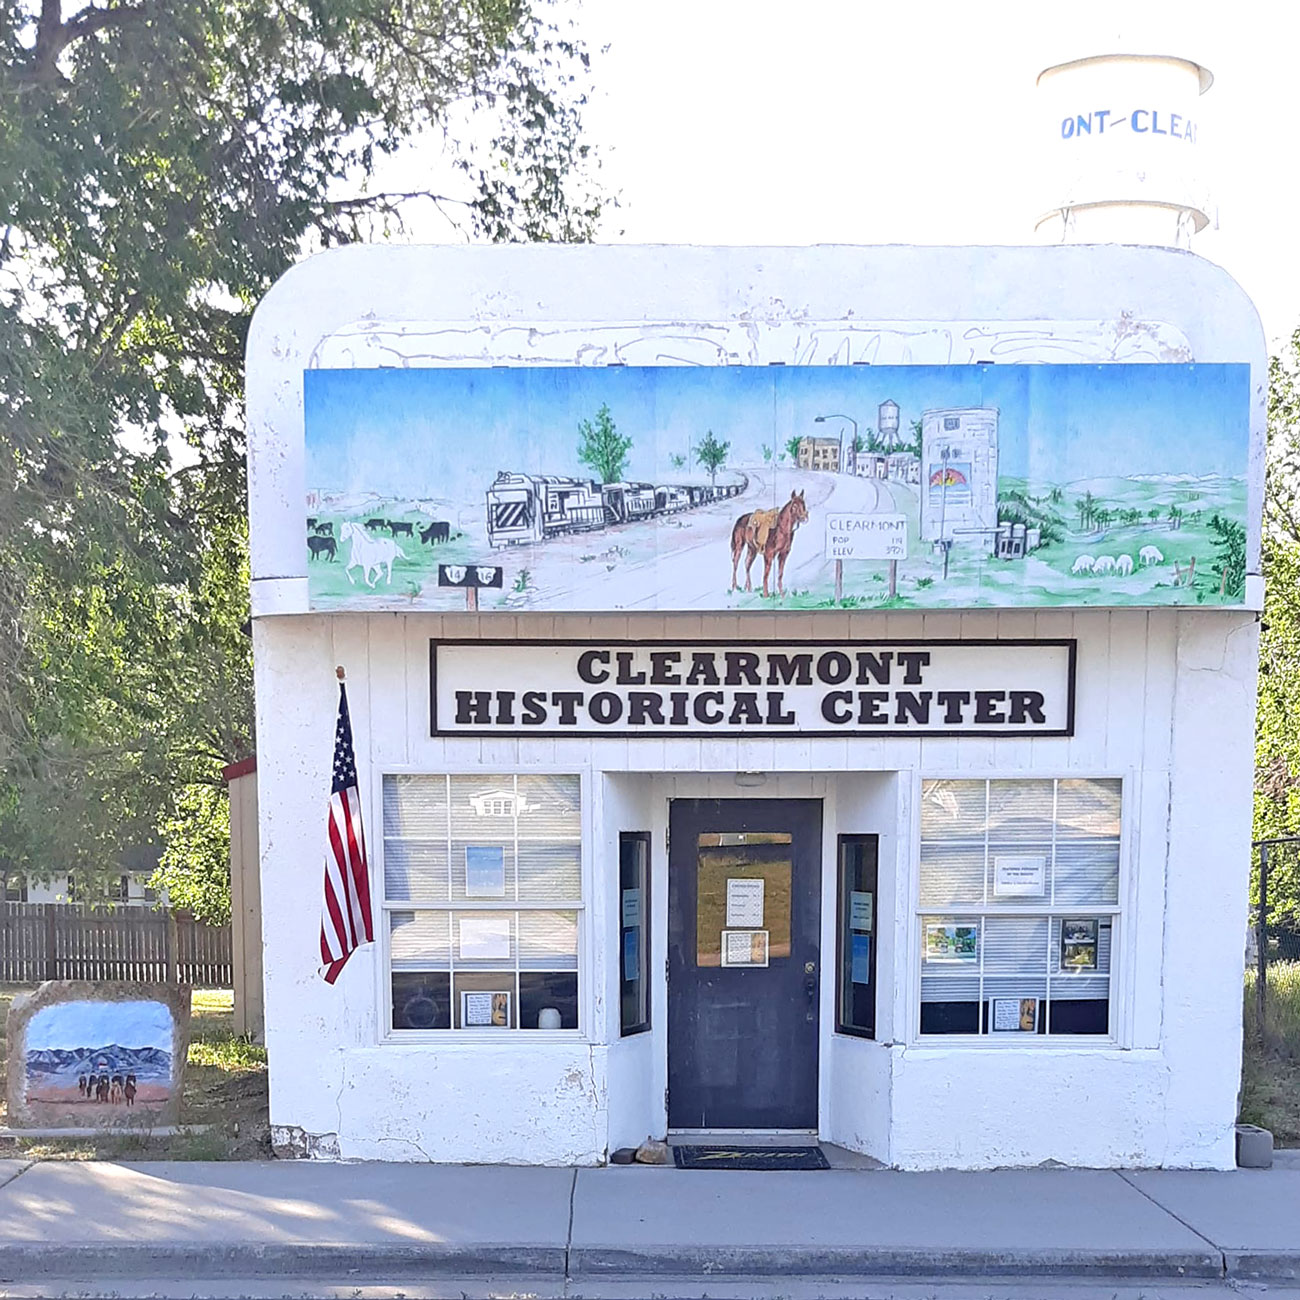 Clearmont Historical Group Center